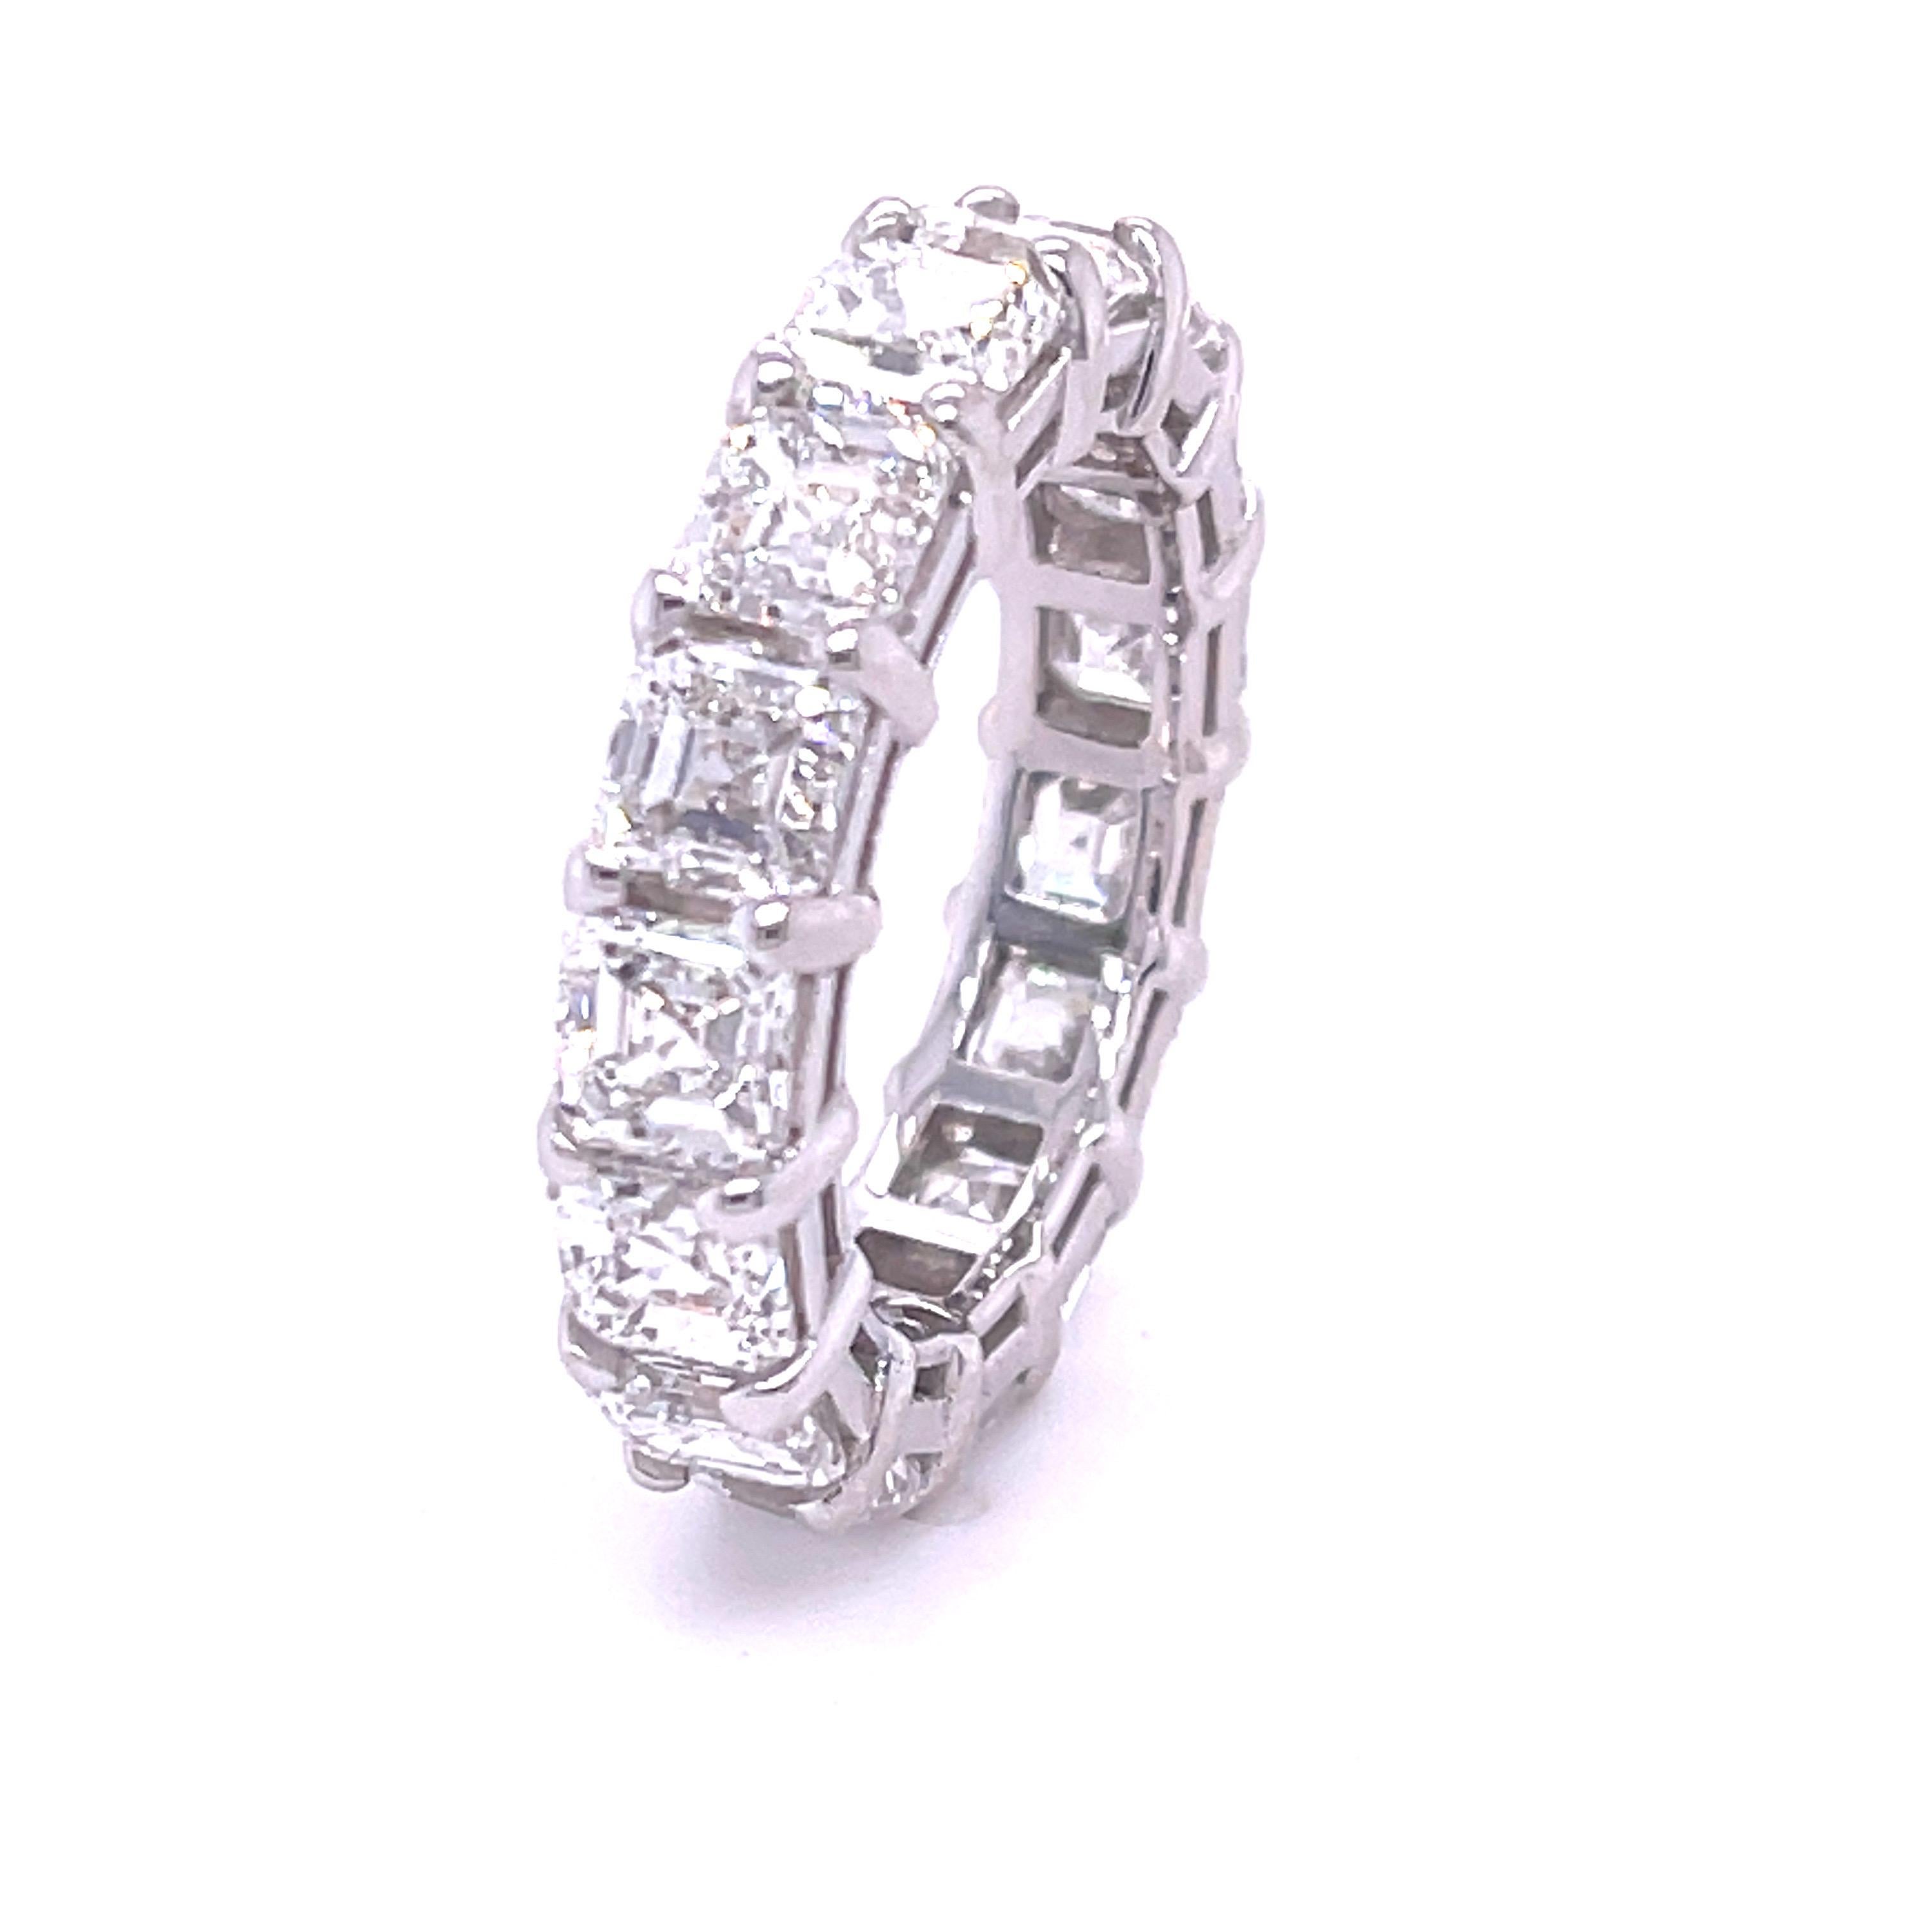 Asscher Cut Anniversary Band Has 15 Square Emerald Cut Diamonds 7..98 Ct .All Has GIA Certs For Sale